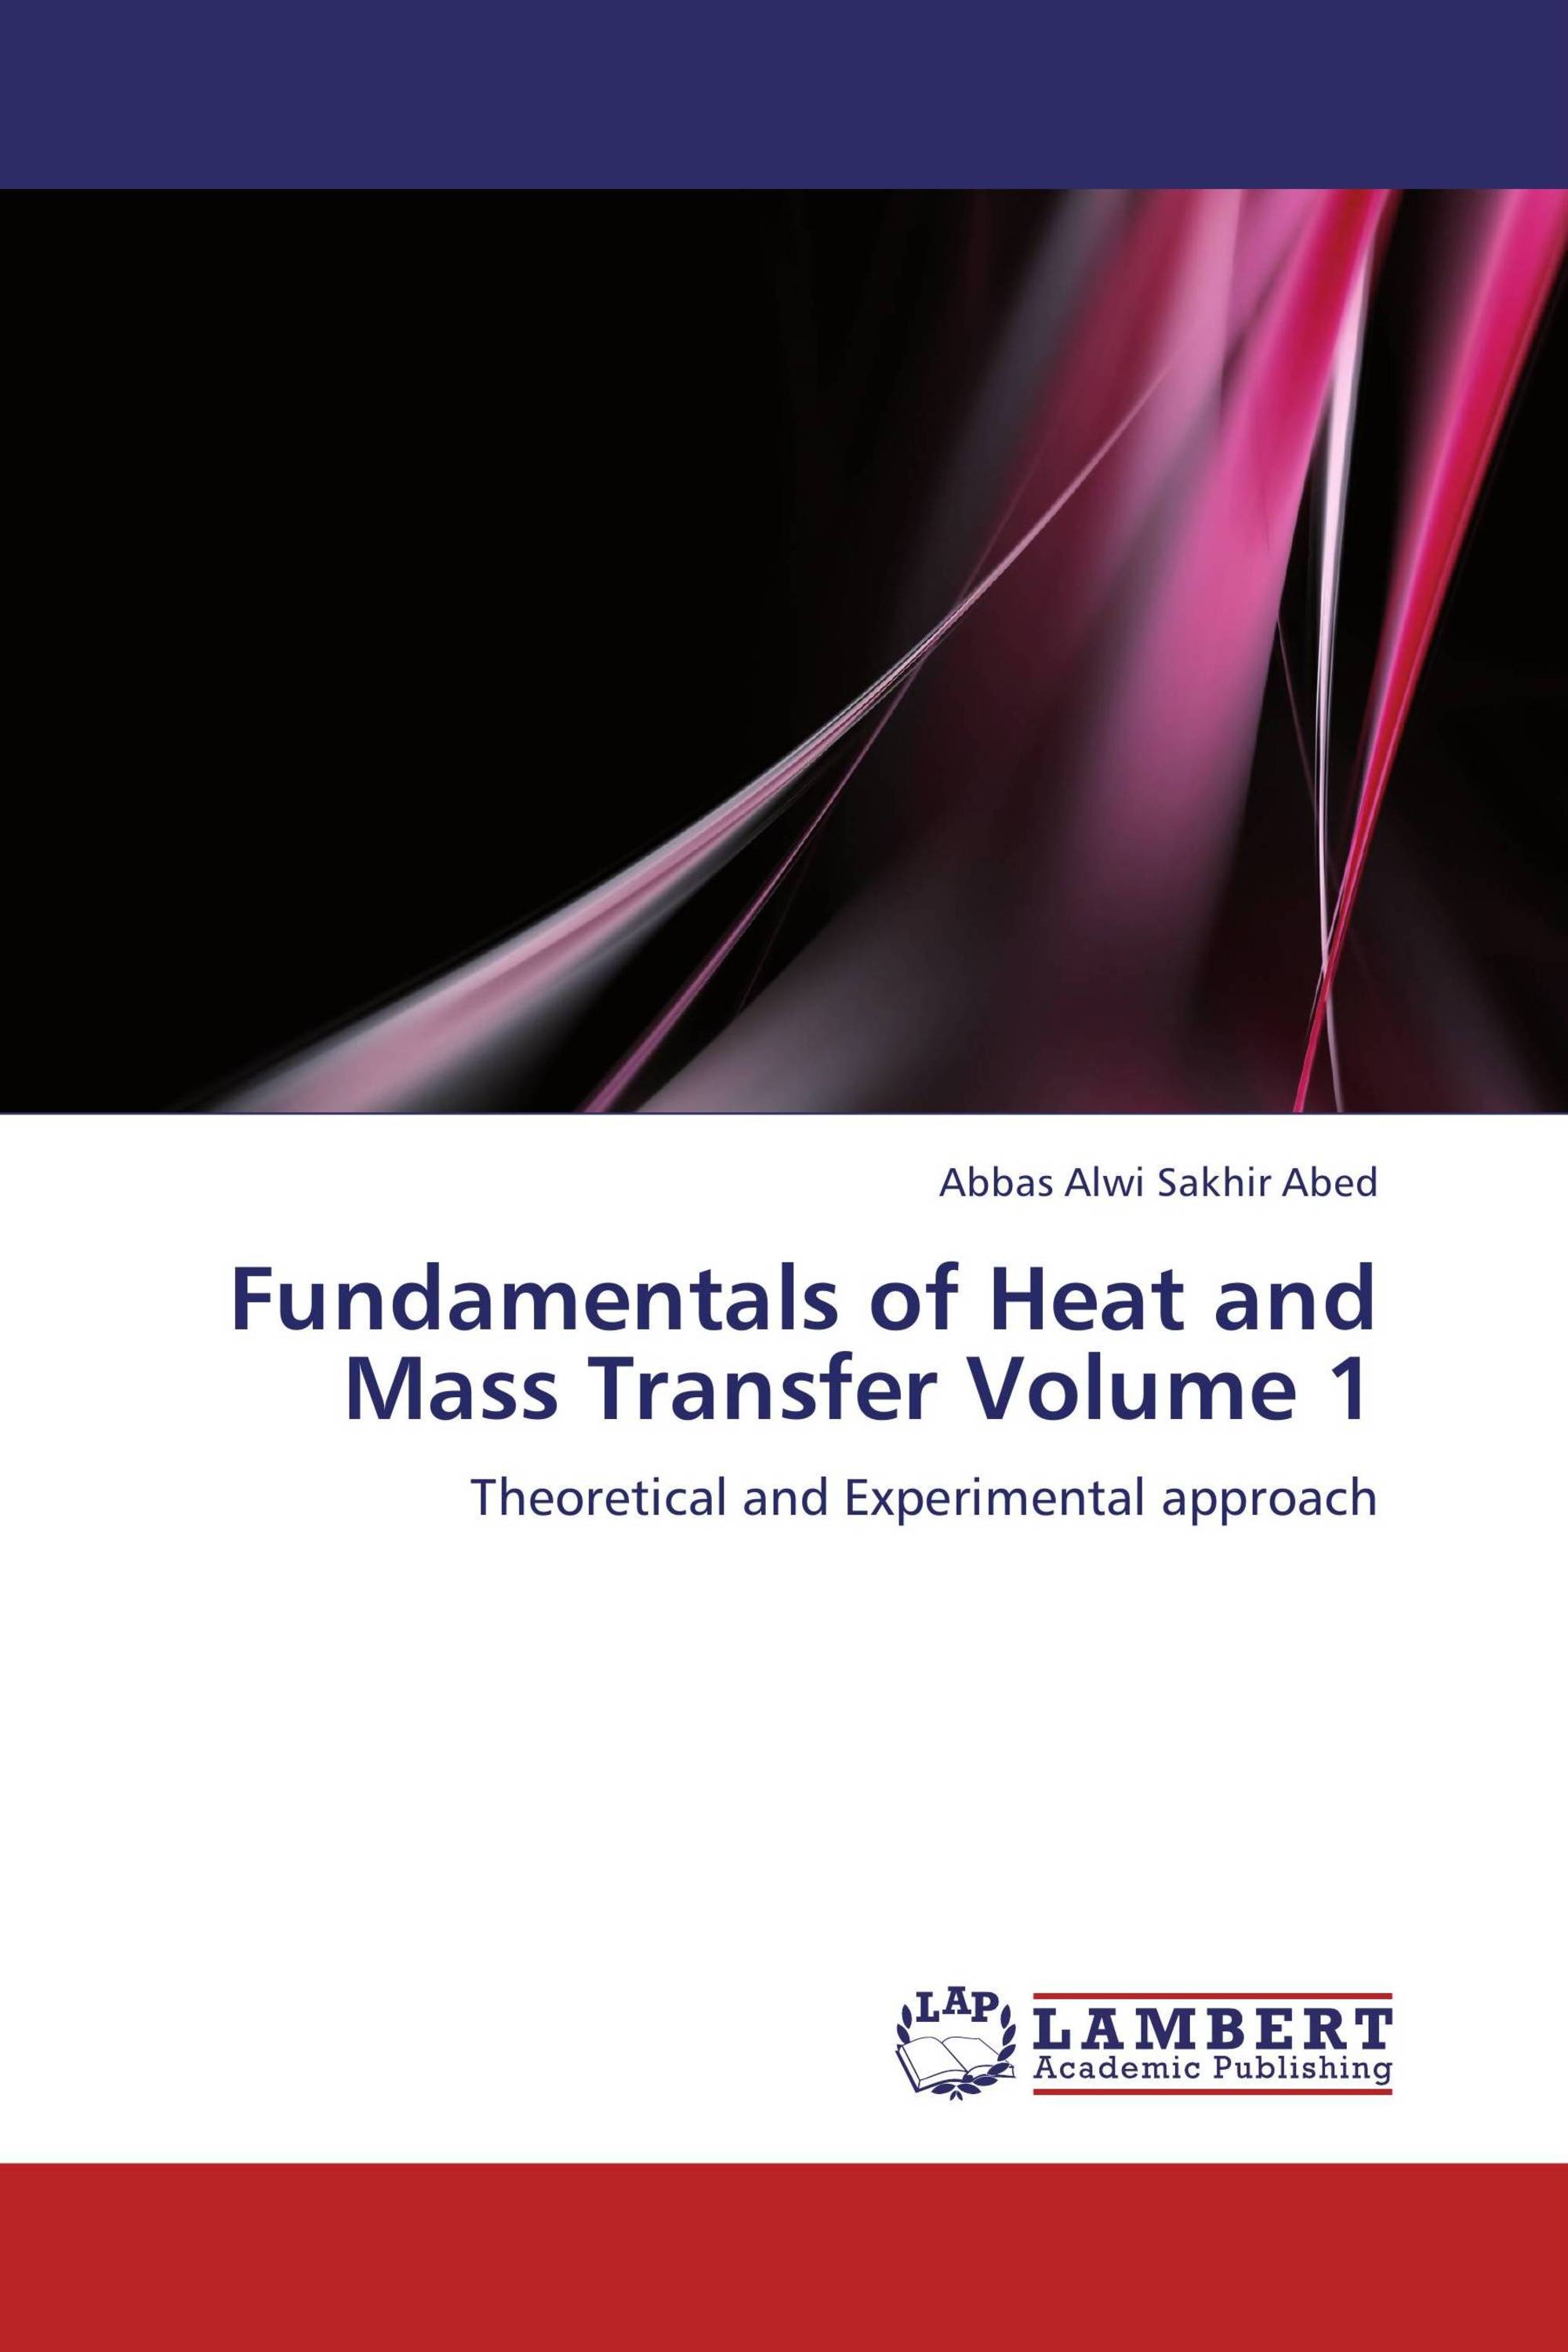 phd thesis heat and mass transfer